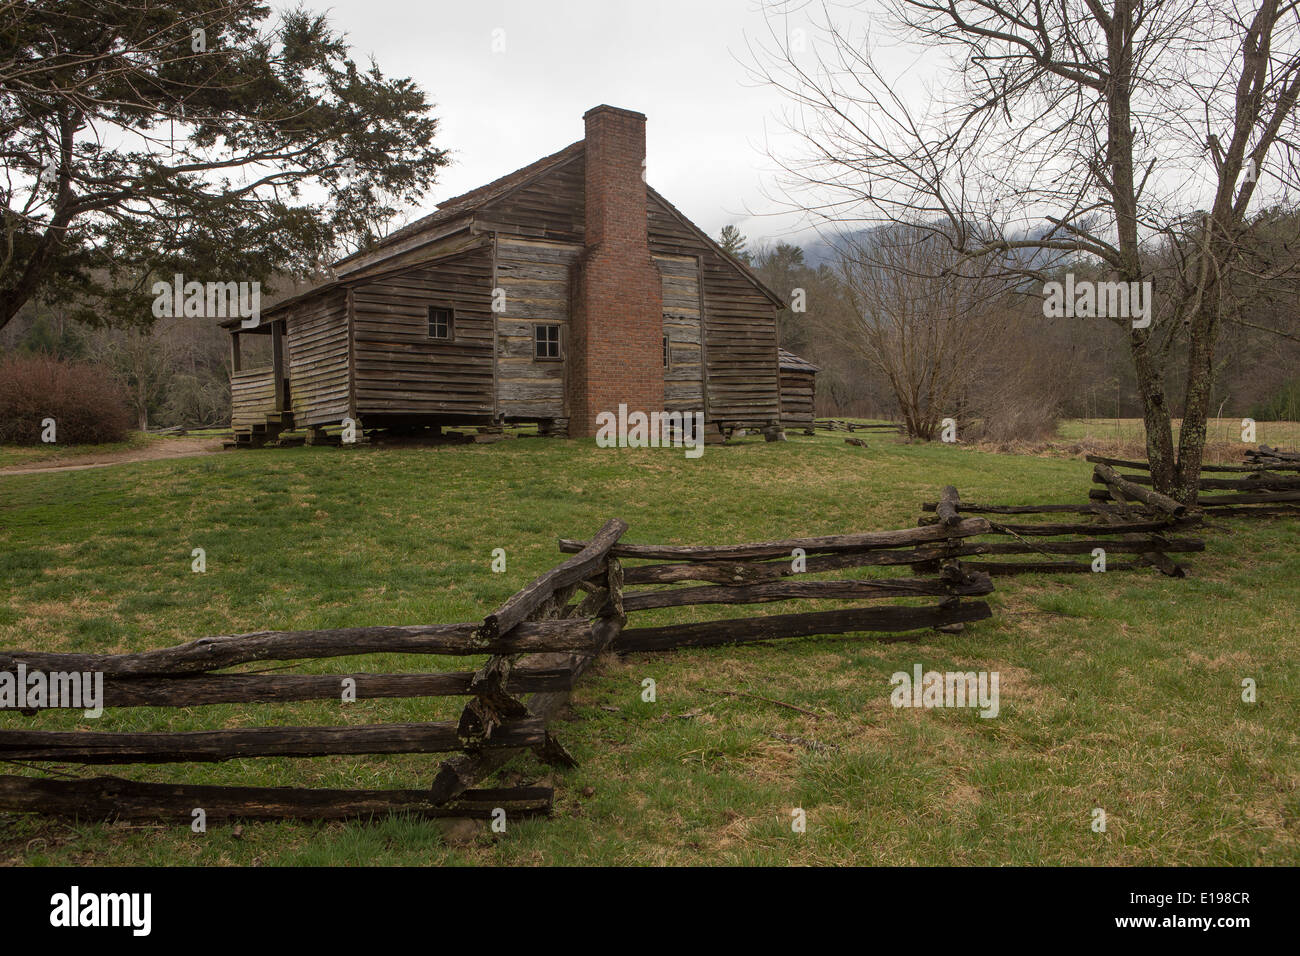 Dan Lawson Ort ist in Cades Cove Gebiet des Great Smoky Mountains National Park in Tennessee abgebildet. Stockfoto